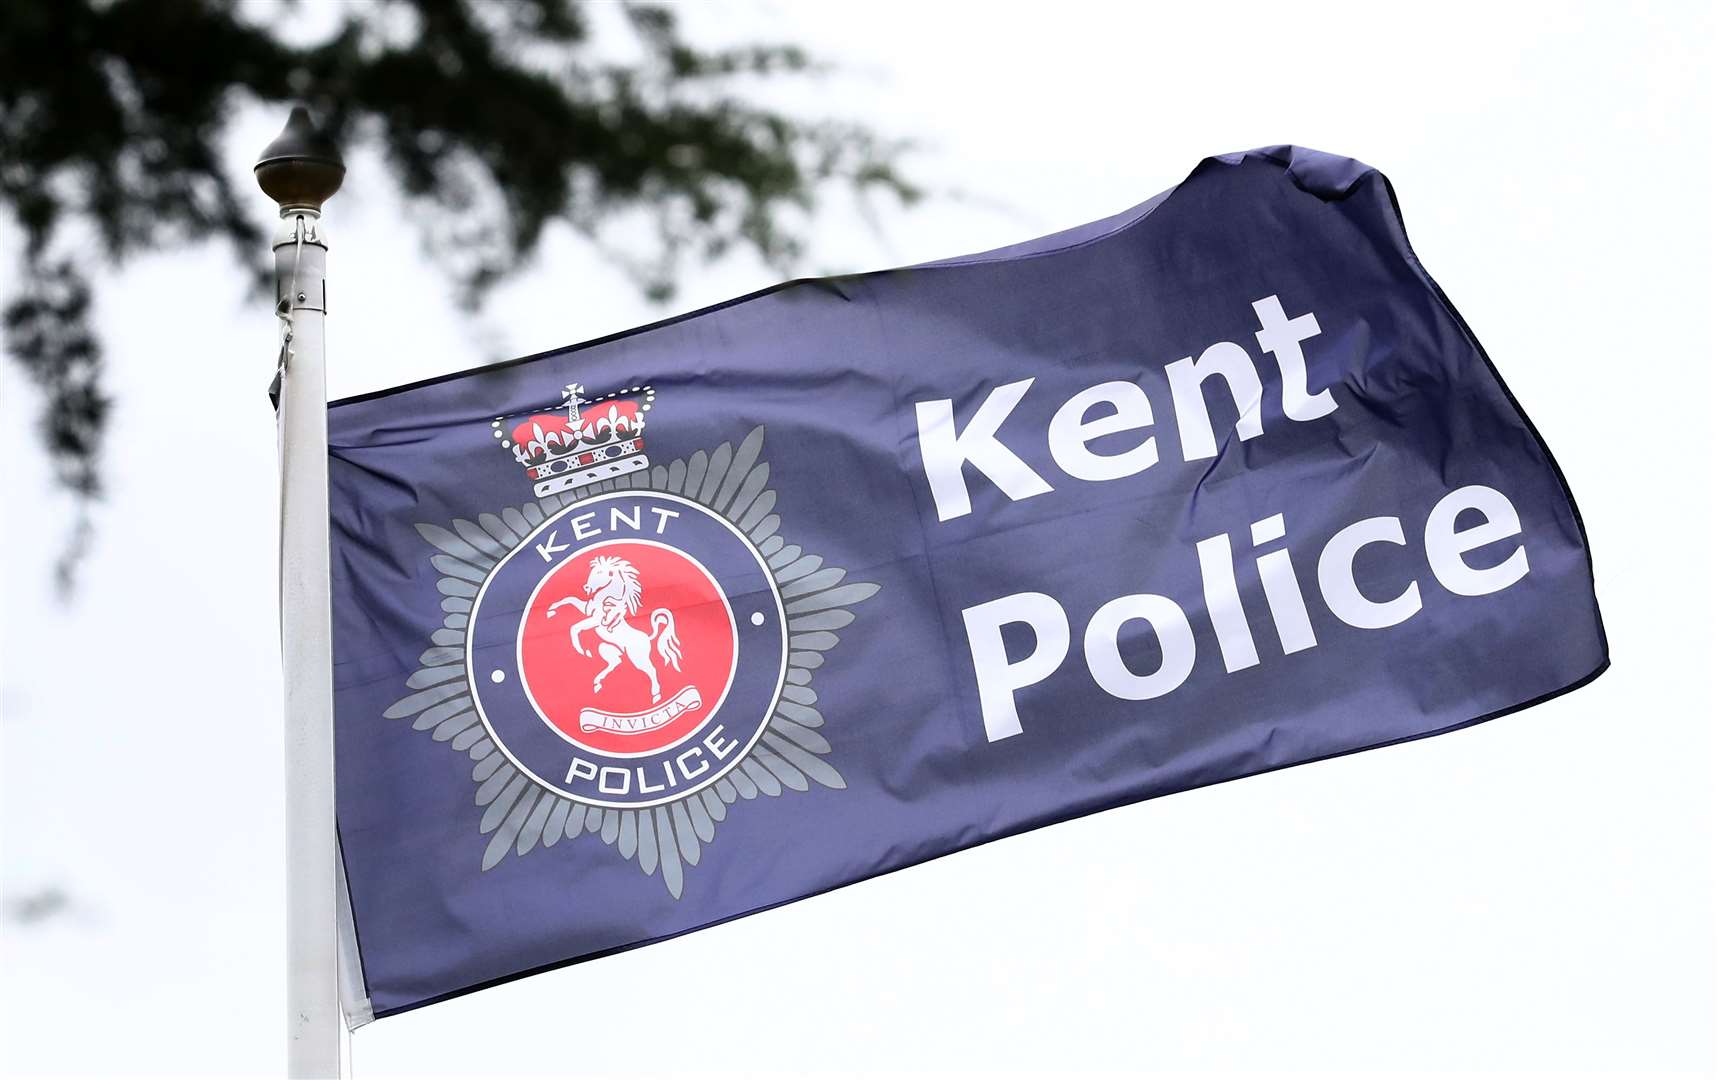 Kent Police are continuing their inquiries (Gareth Fuller/PA)